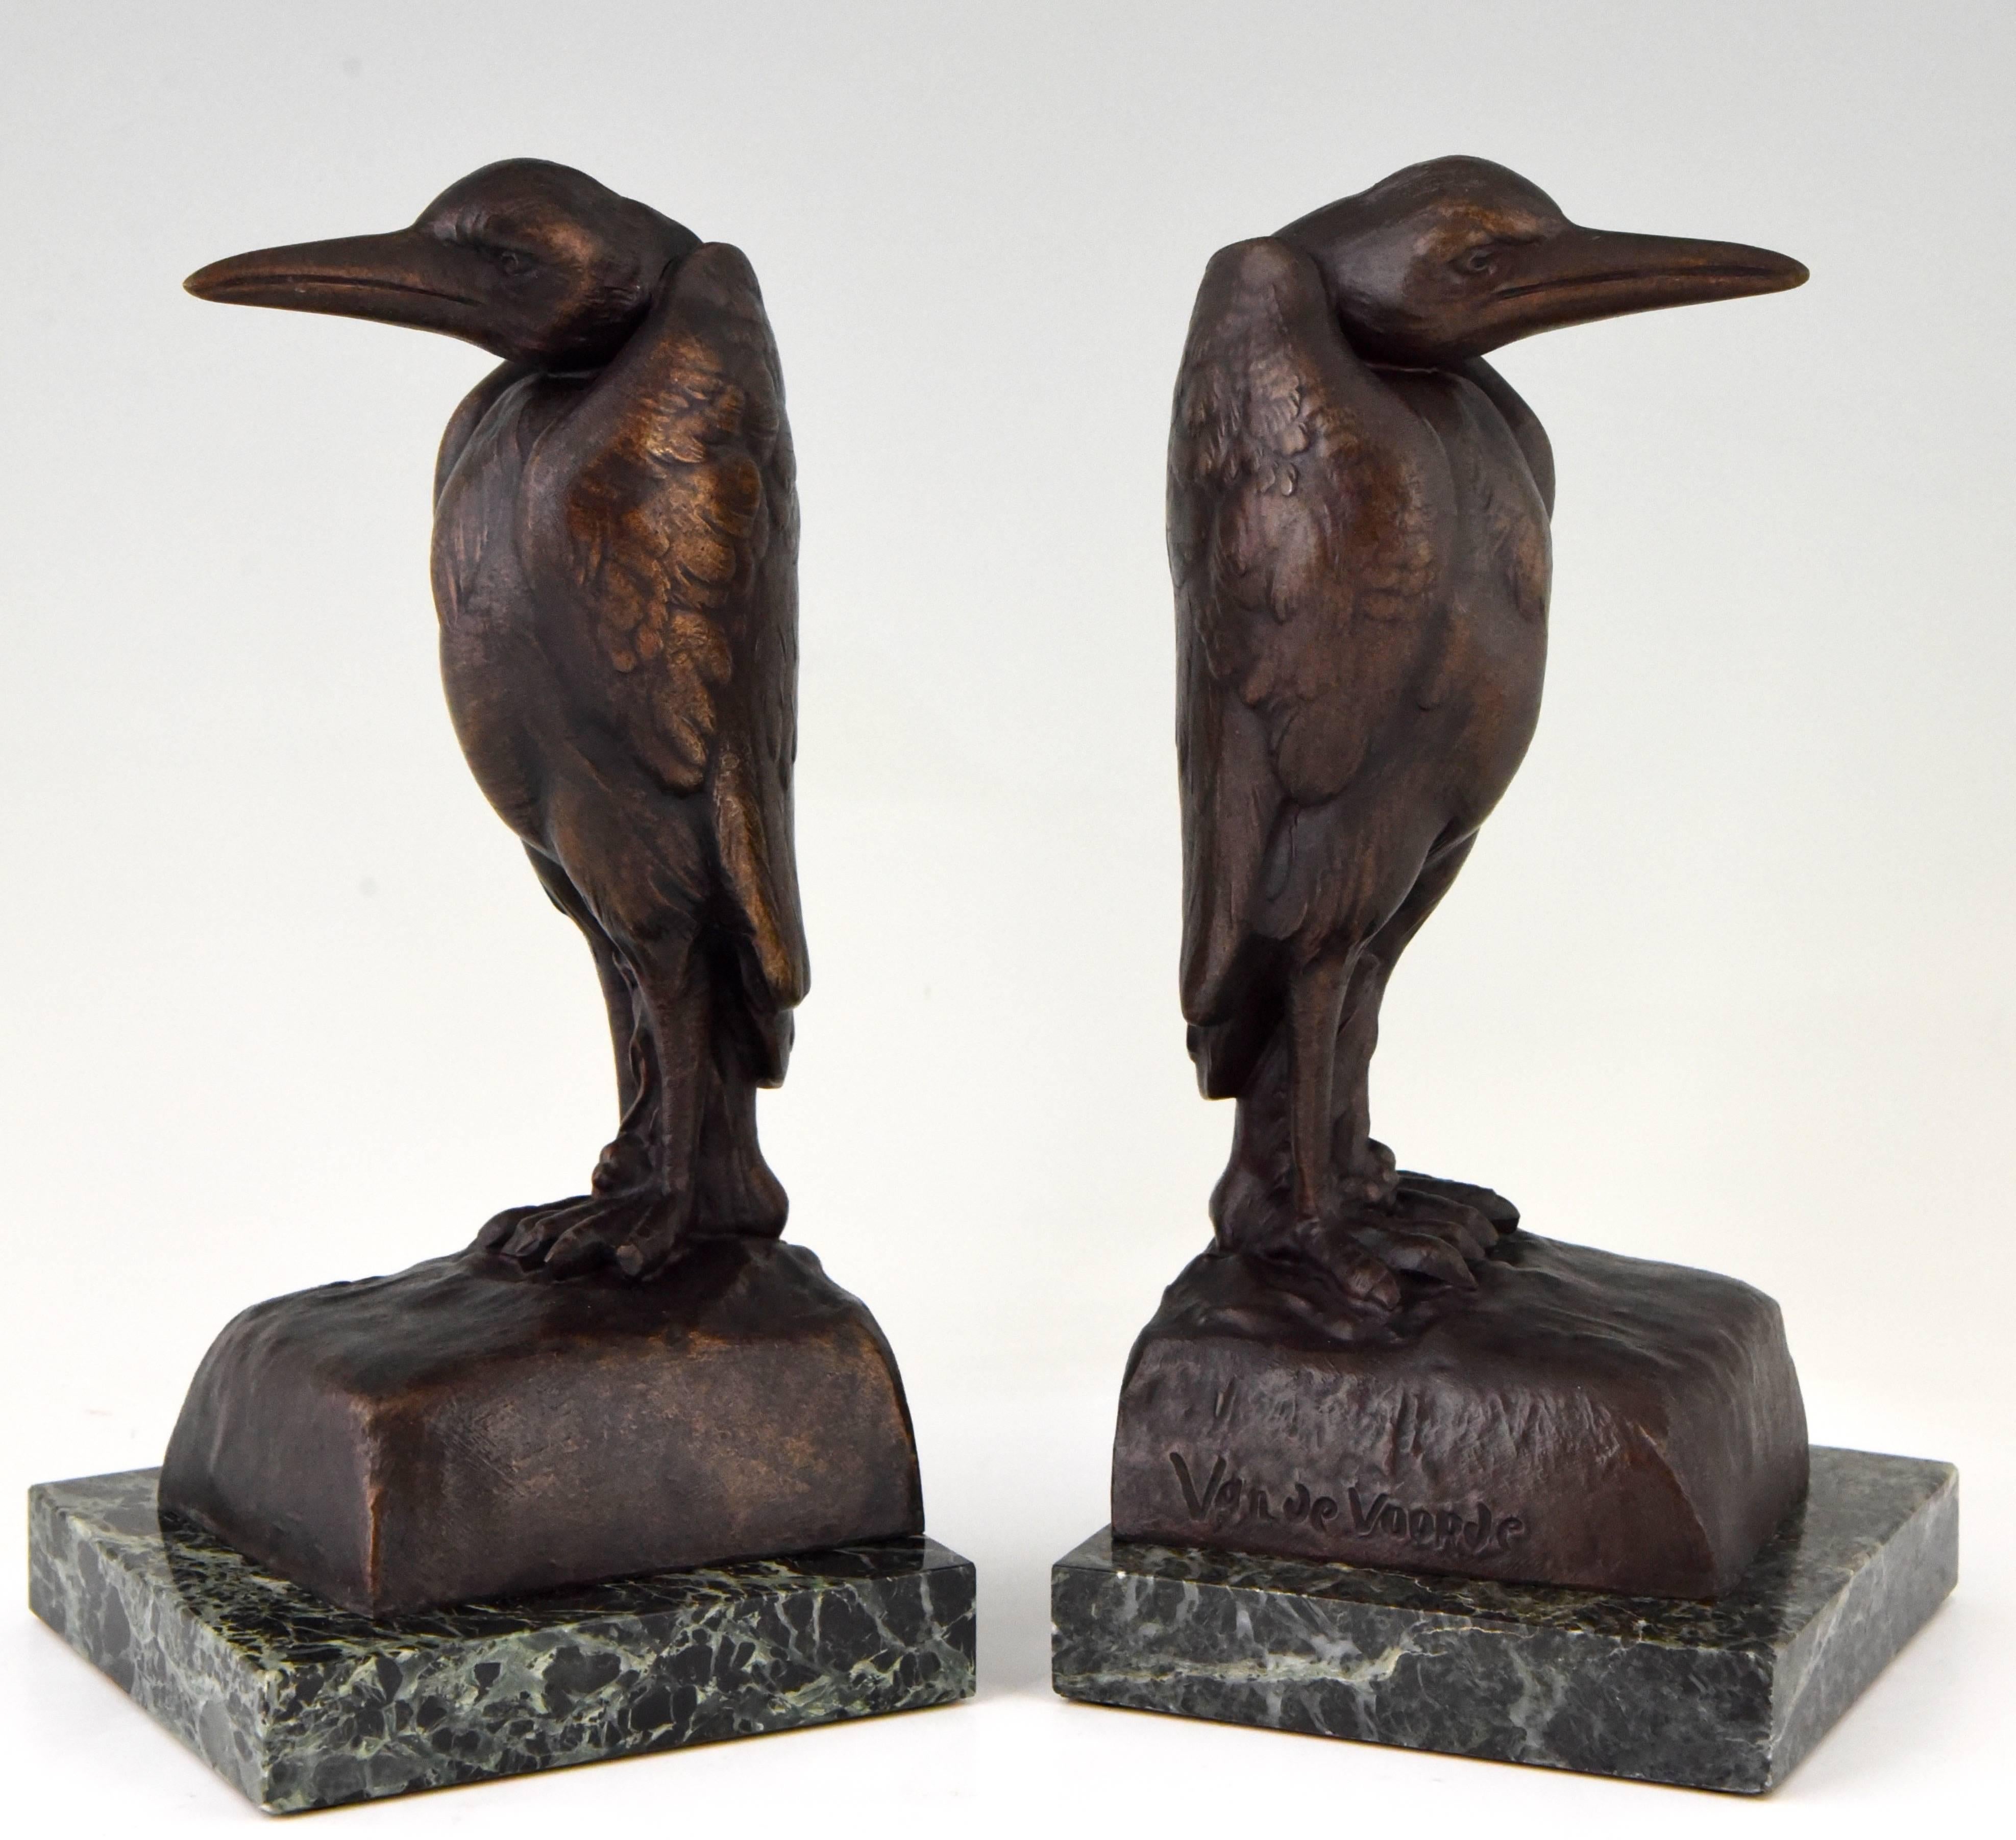 Decorative Art Deco bookends in the shape of Marabous by the French artist Georges van de Voorde. These figures are in art metal and have a lovely brown patina. They stand on a green marble base. Signed by the artist and with foundry